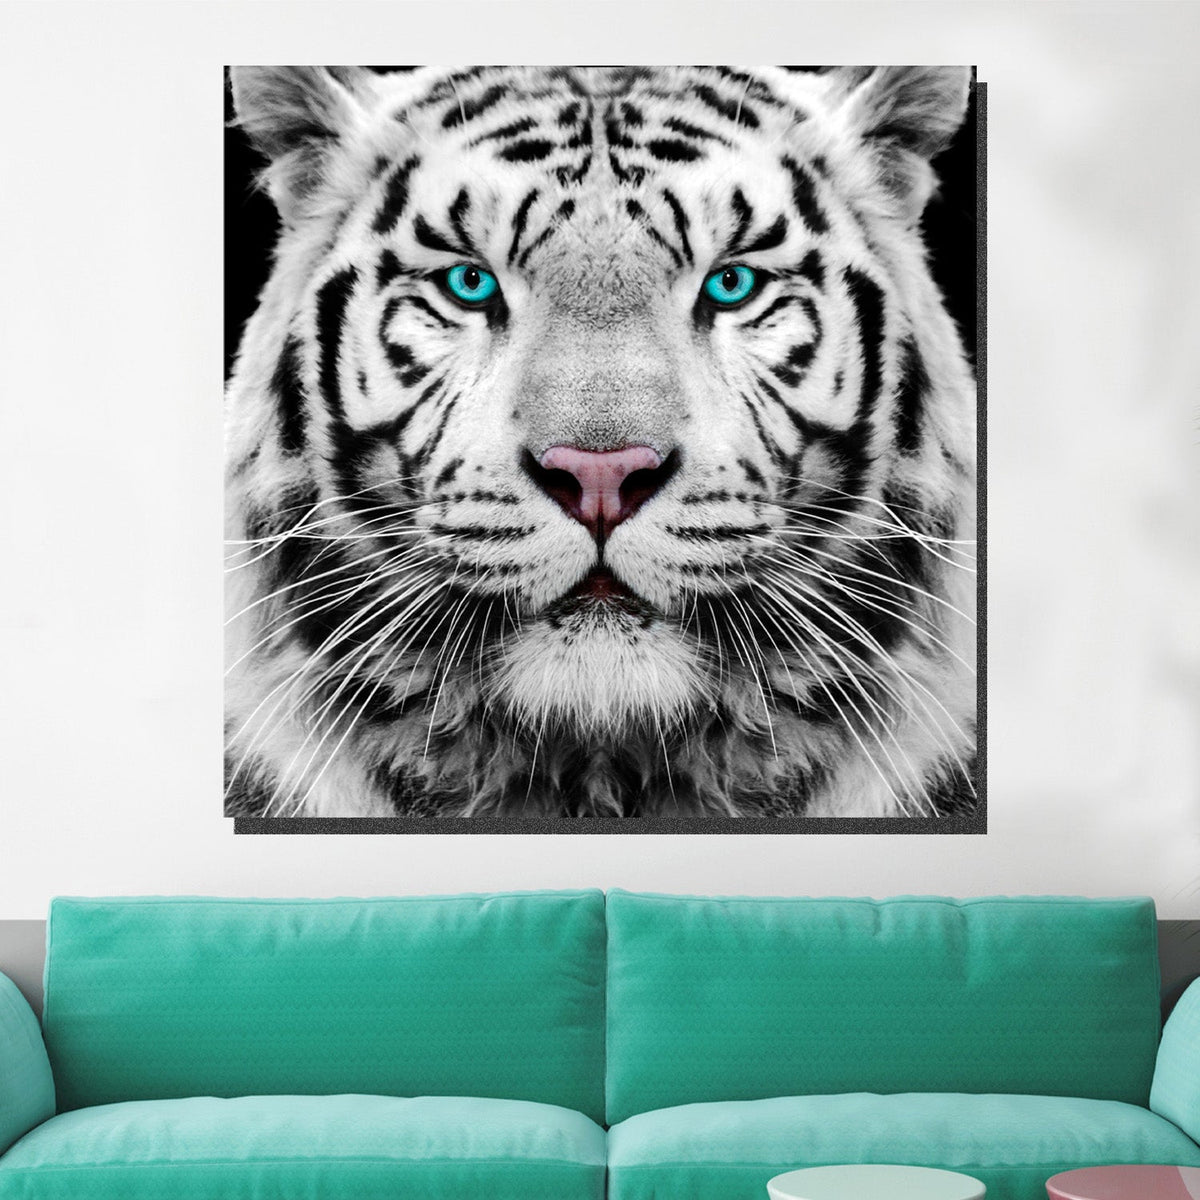 https://cdn.shopify.com/s/files/1/0387/9986/8044/products/SnowTigerCanvasArtprintStretched-3.jpg